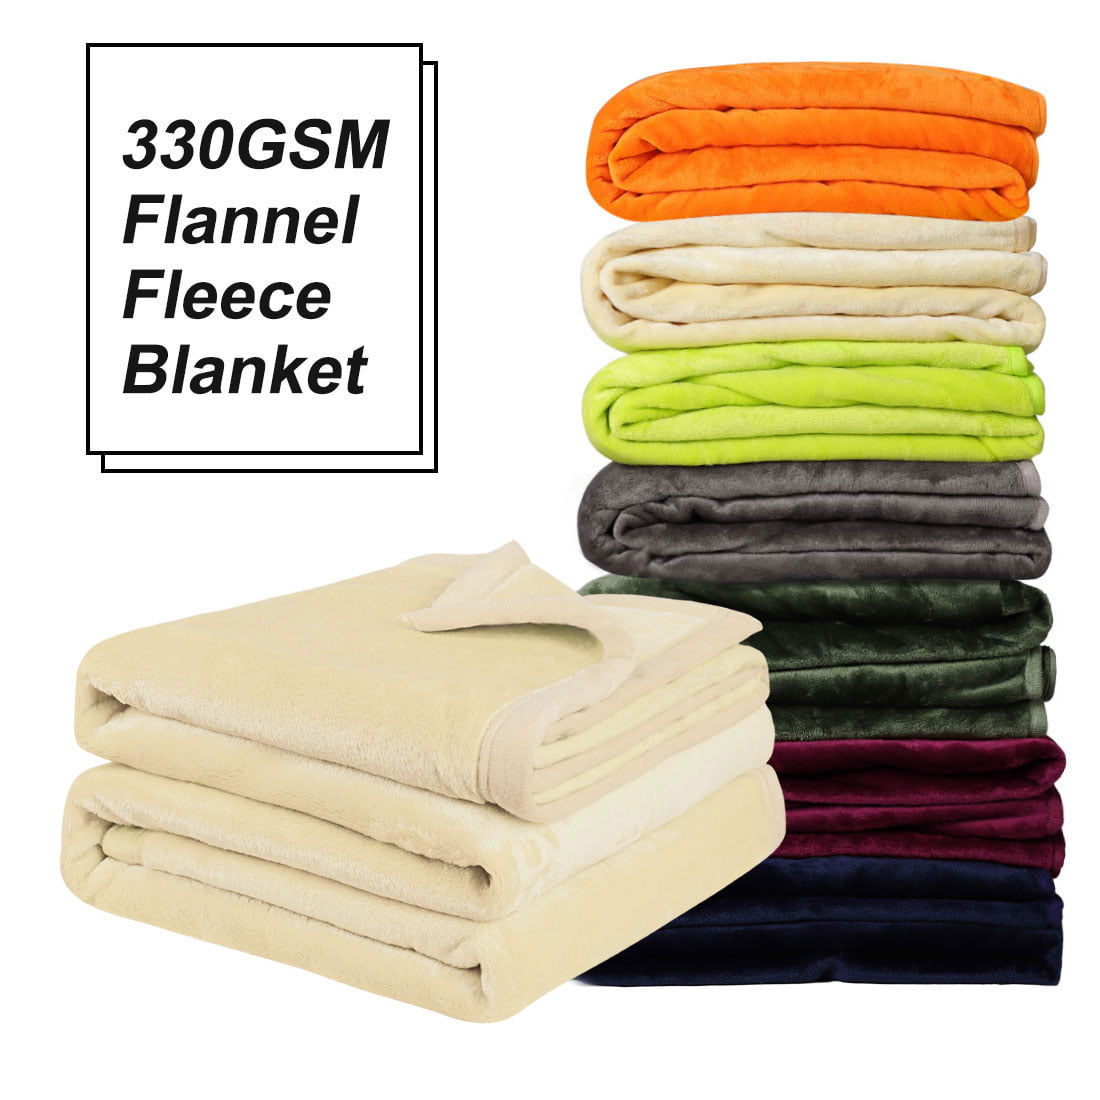 Details about   Double-sided Fleece Blanket Soft Air Conditioning Flannel Blanket Travel Blanket 